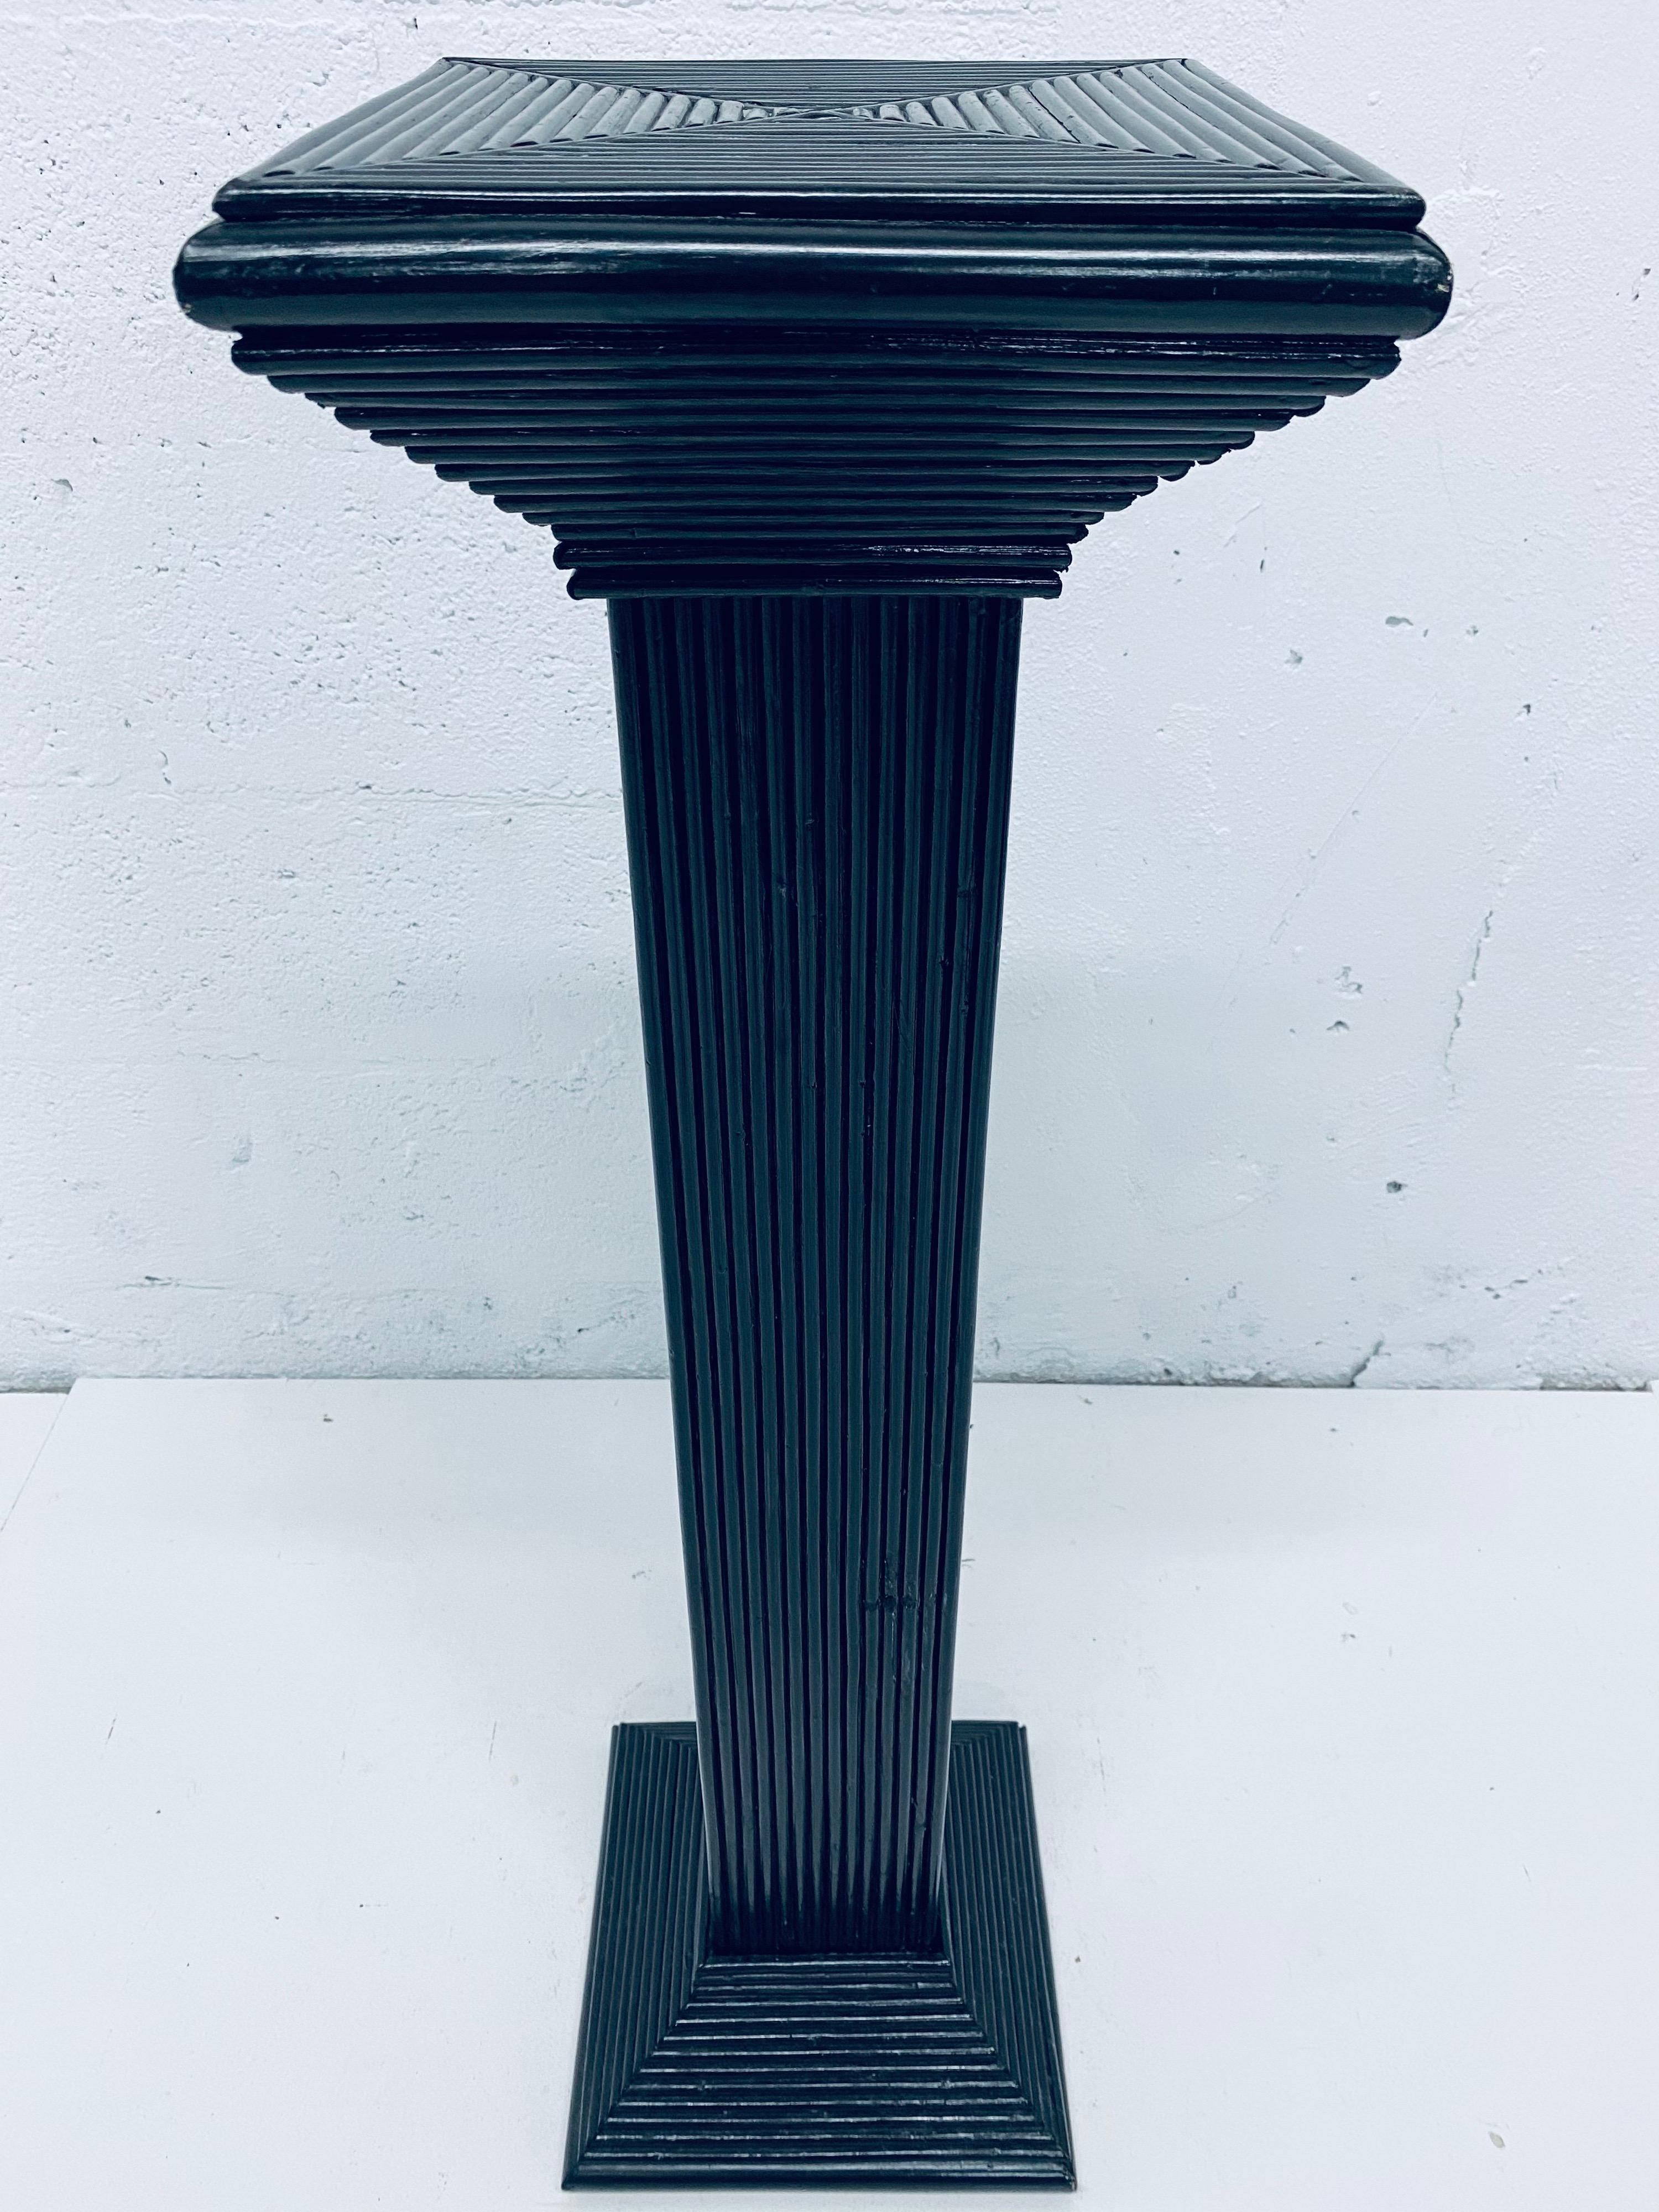 Mid-Century Modern Midcentury Black Lacquered Pencil Reed Rattan Pedestal Table '2 of 4 Available' For Sale